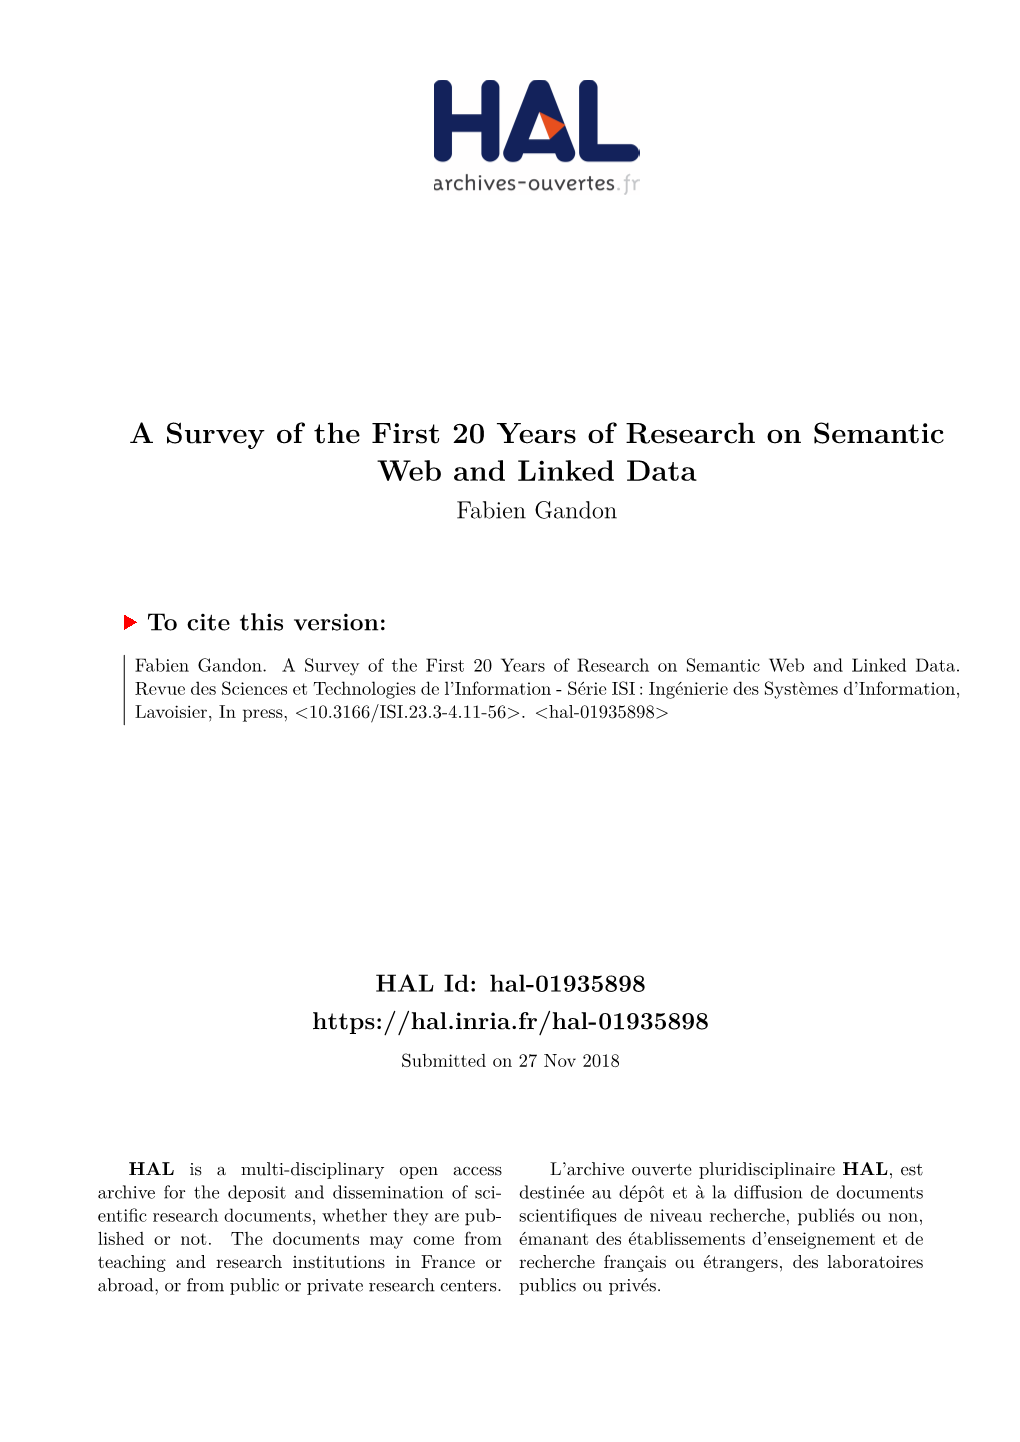 A Survey of the First 20 Years of Research on Semantic Web and Linked Data Fabien Gandon